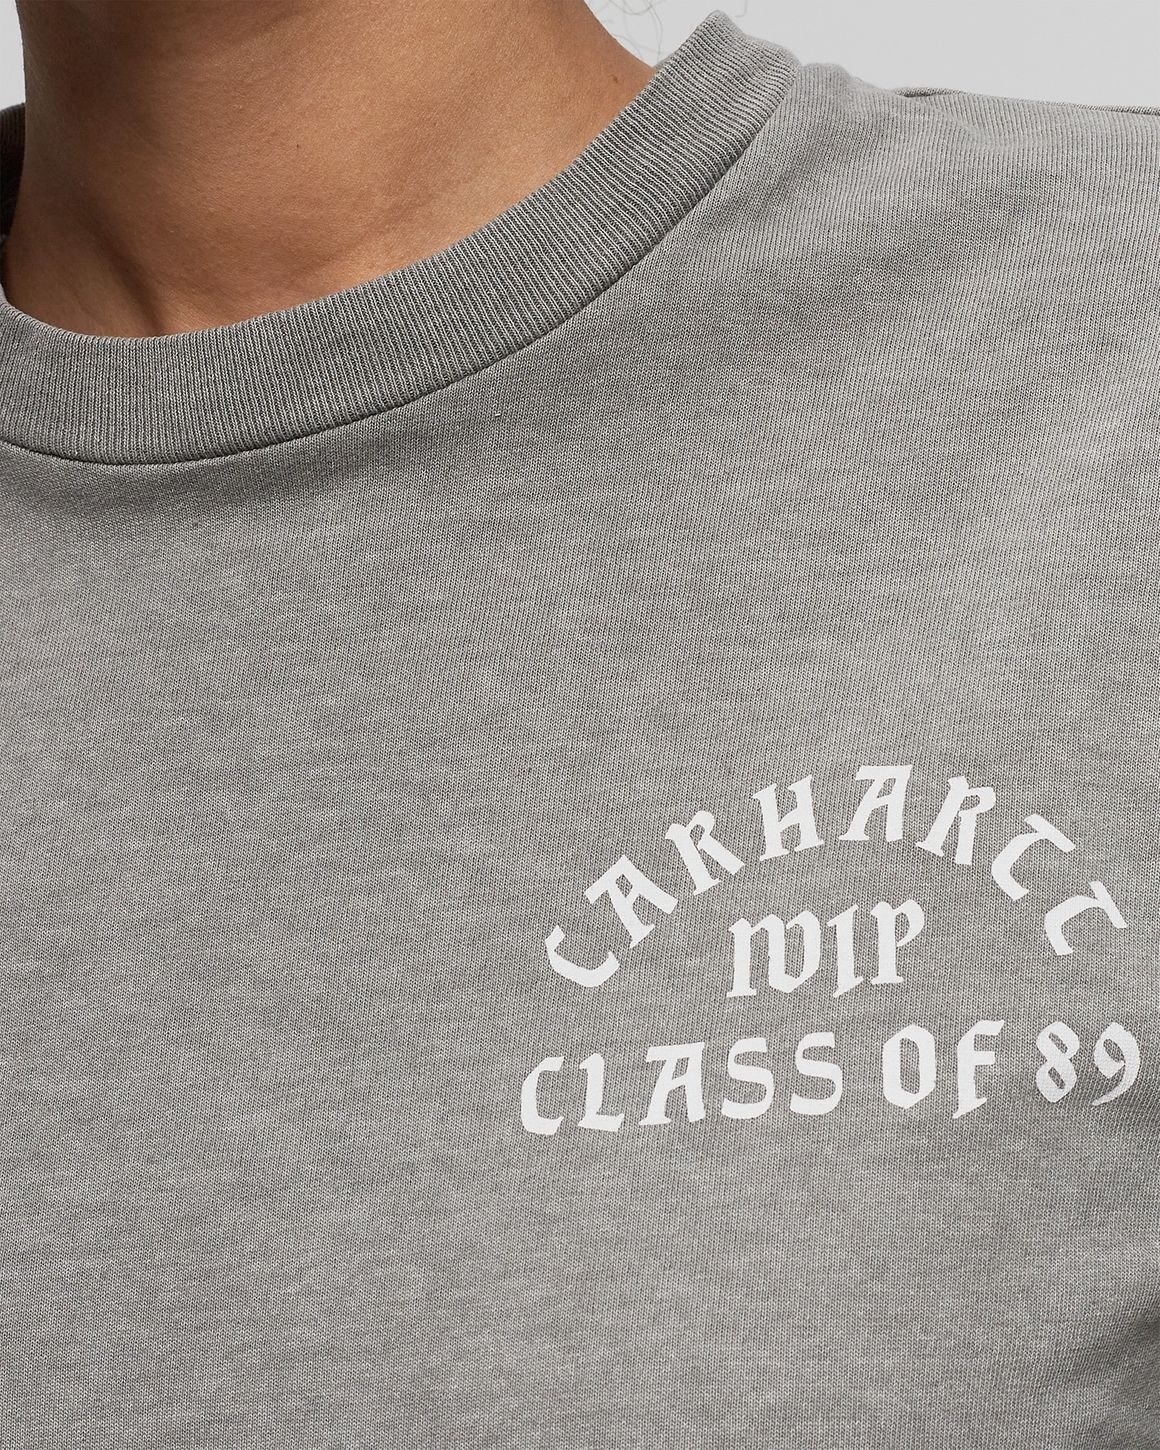 WMNS S/S Class of 89 Tee - 3